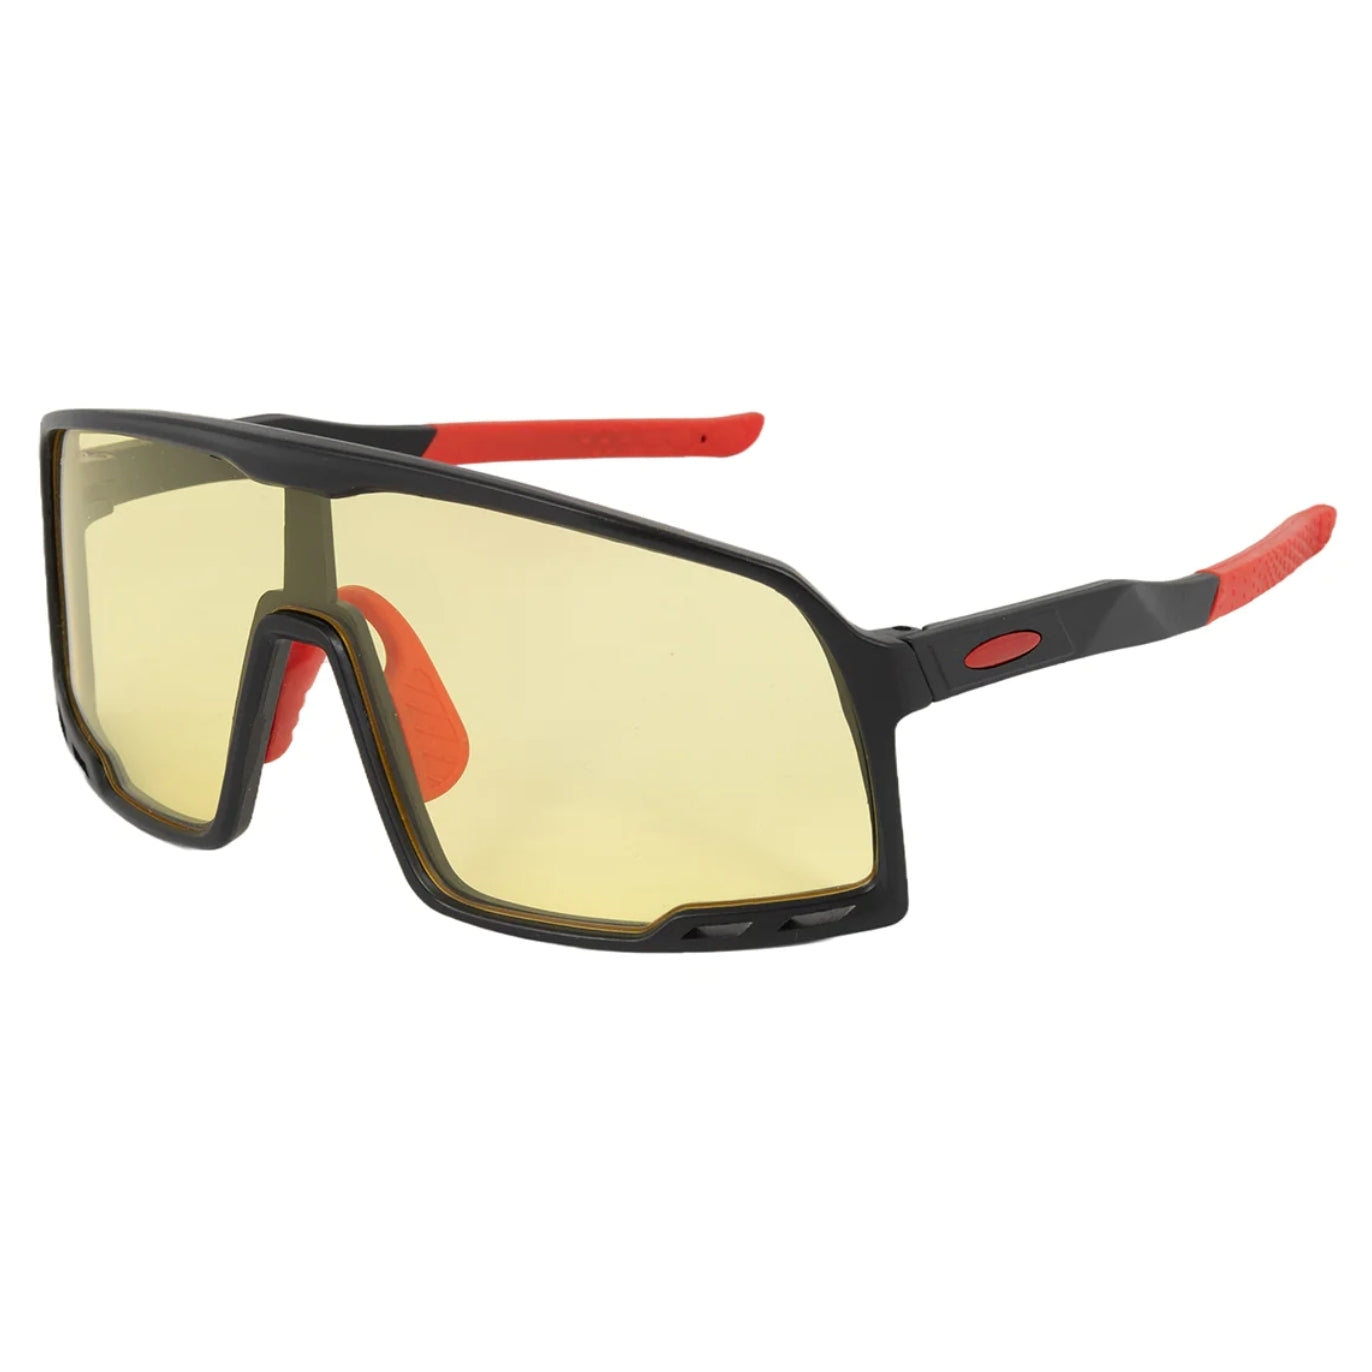 Fly - Allround Sports Sunglass with UV 400 Protection